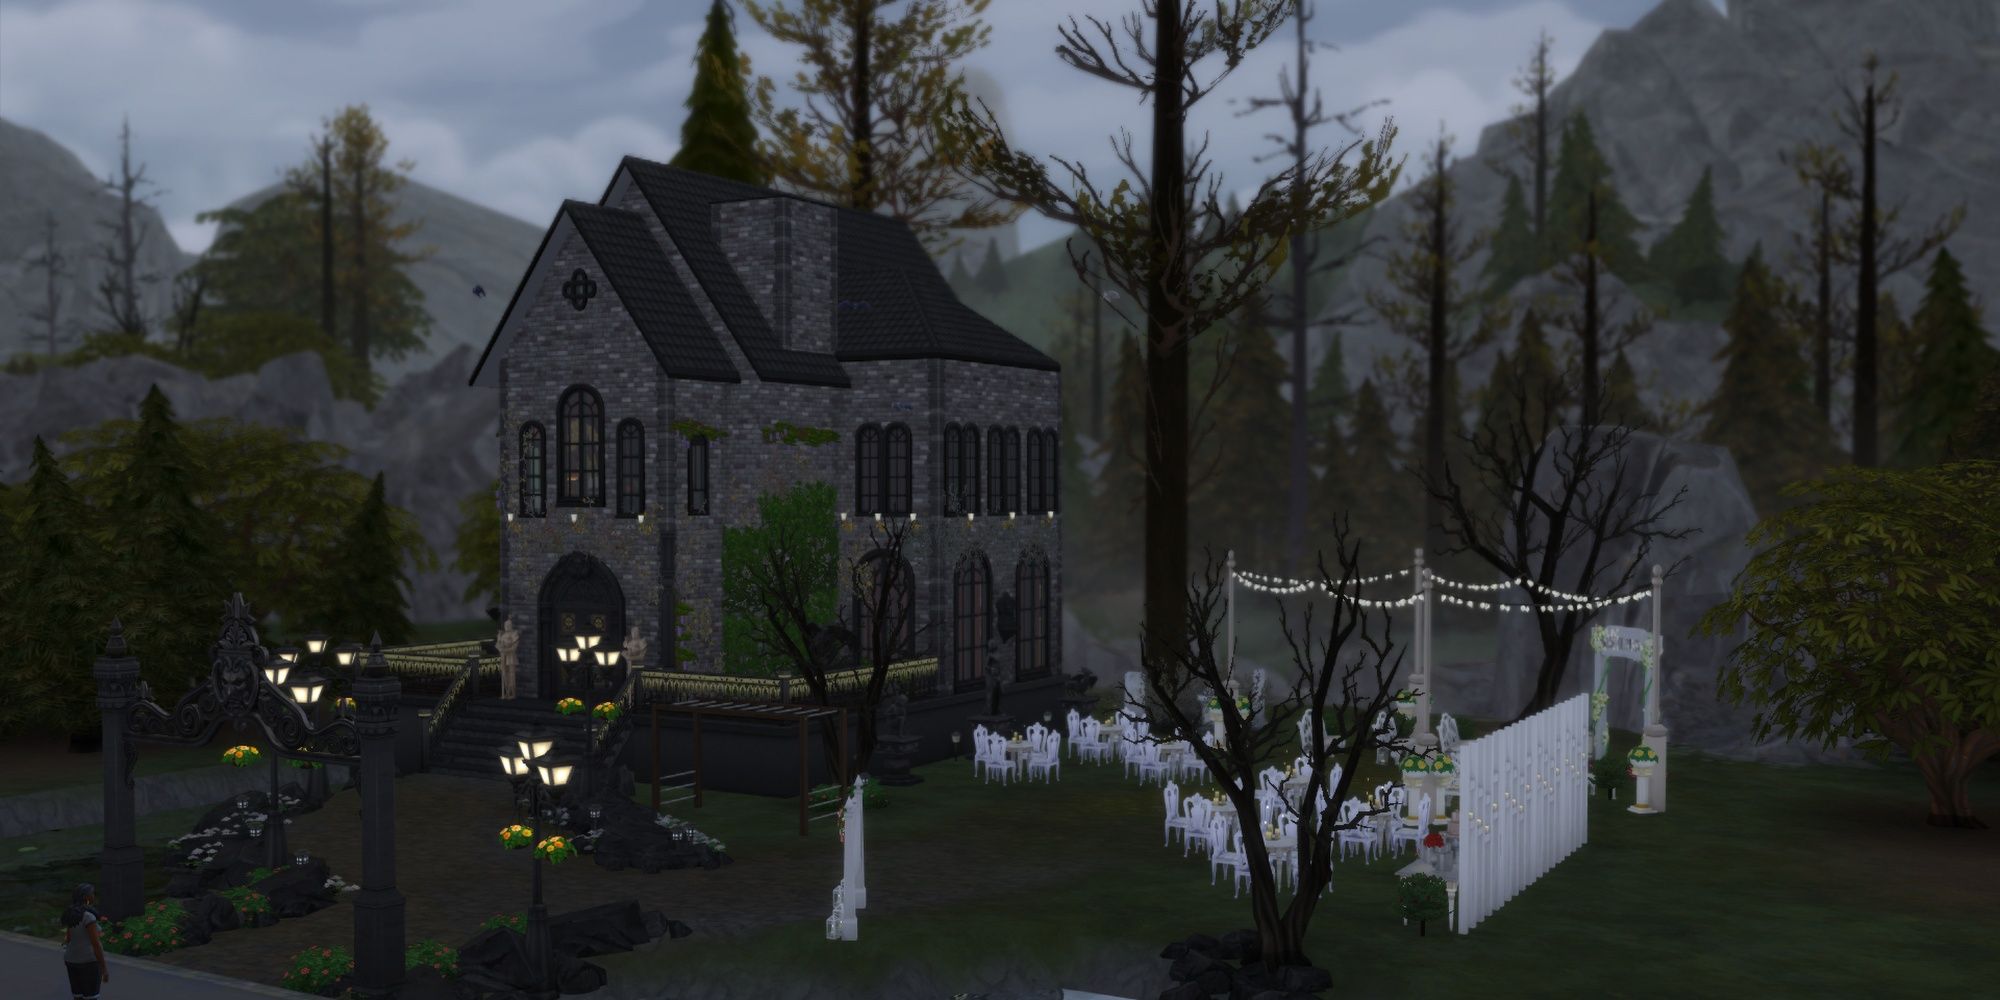 A dark gothic church in The Forgotten Hollow from The Sims 4.